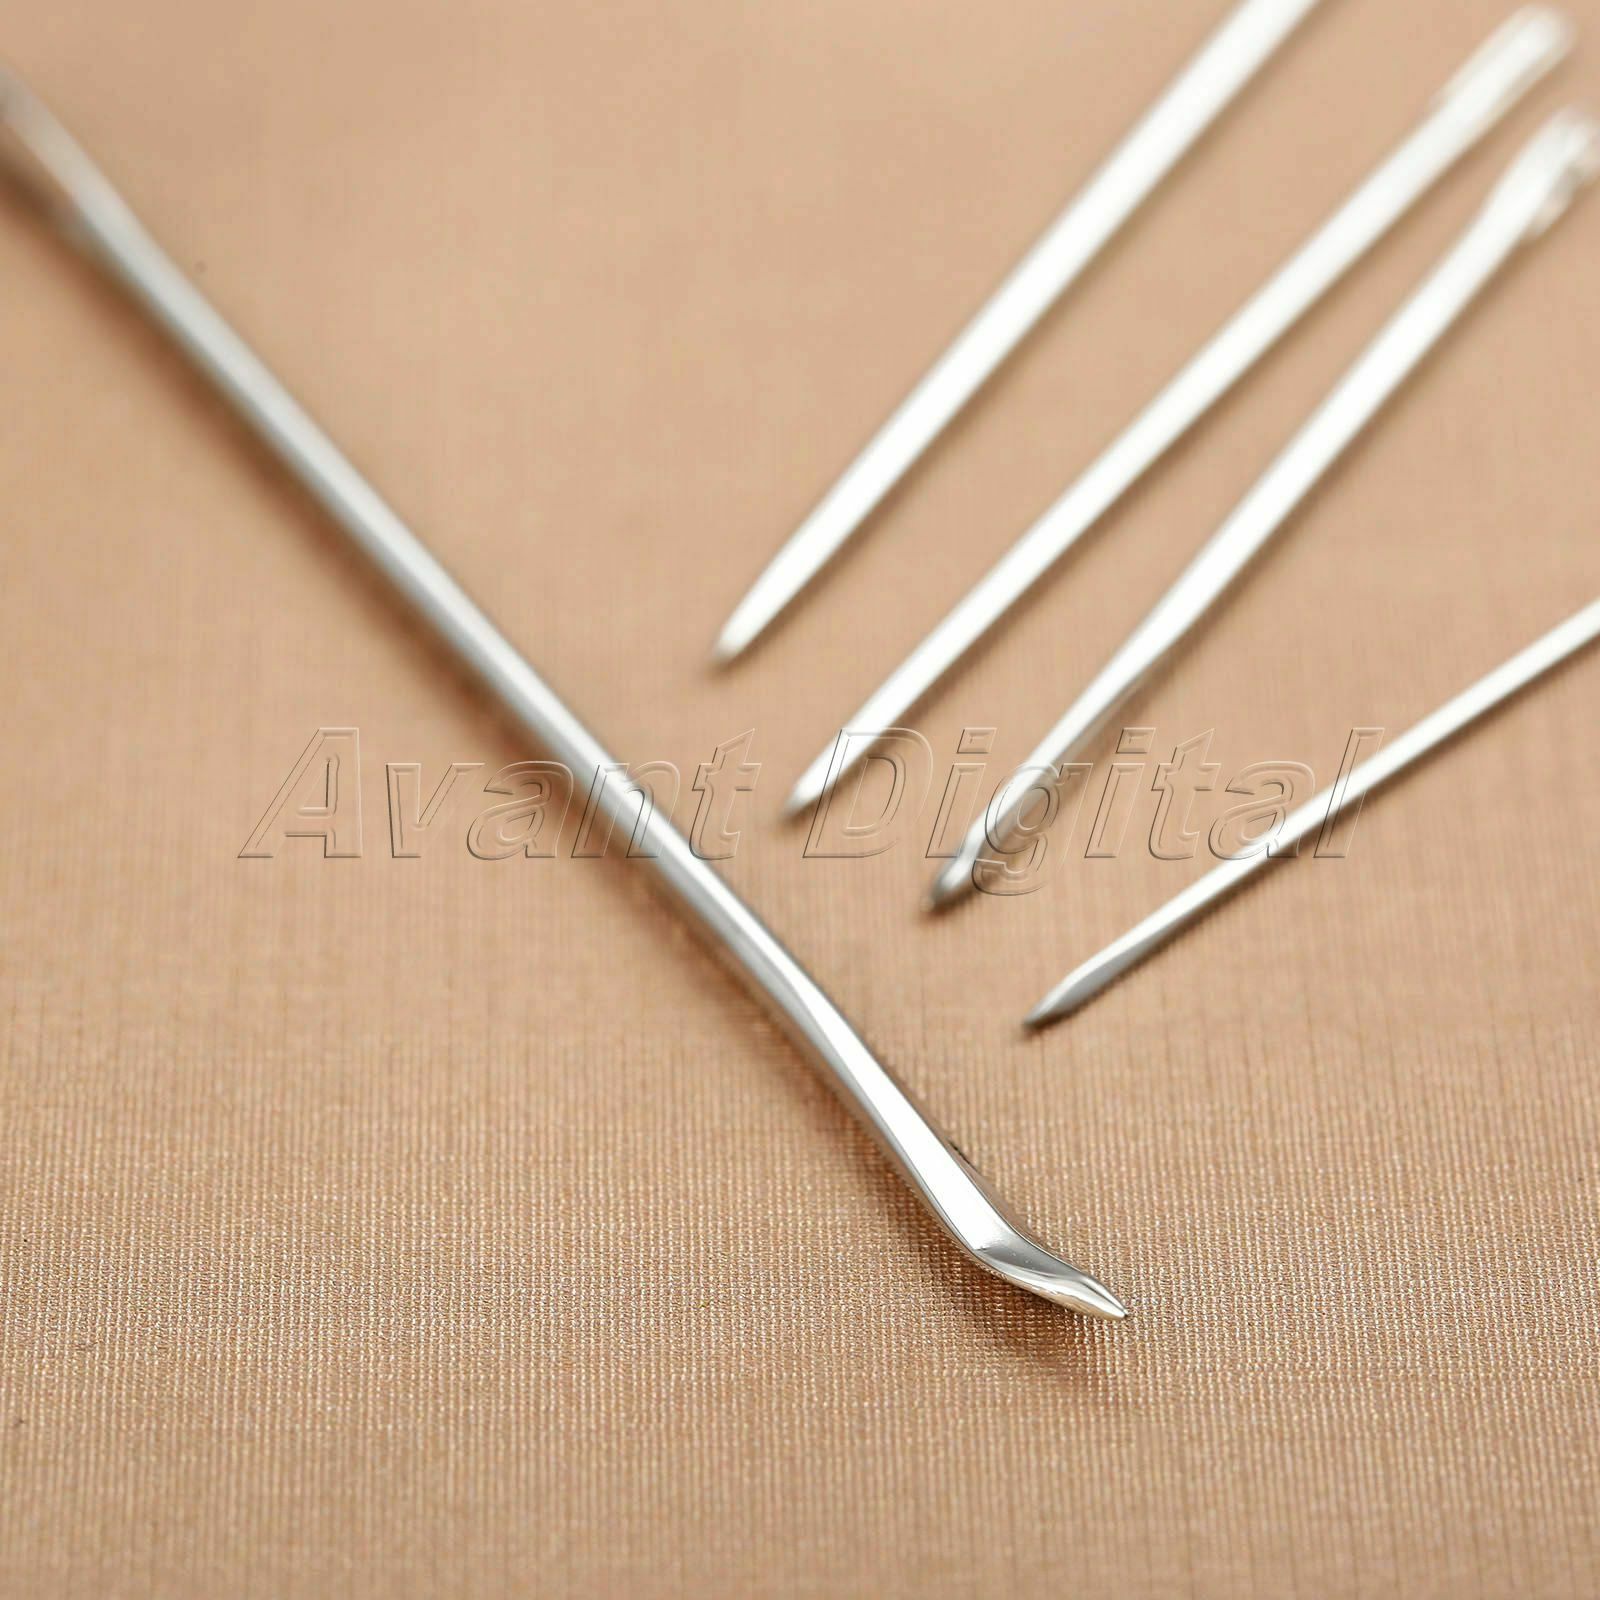 Set of 7 Hand Repair Upholstery Sewing & Curved Needles Carpet Leather Canvas